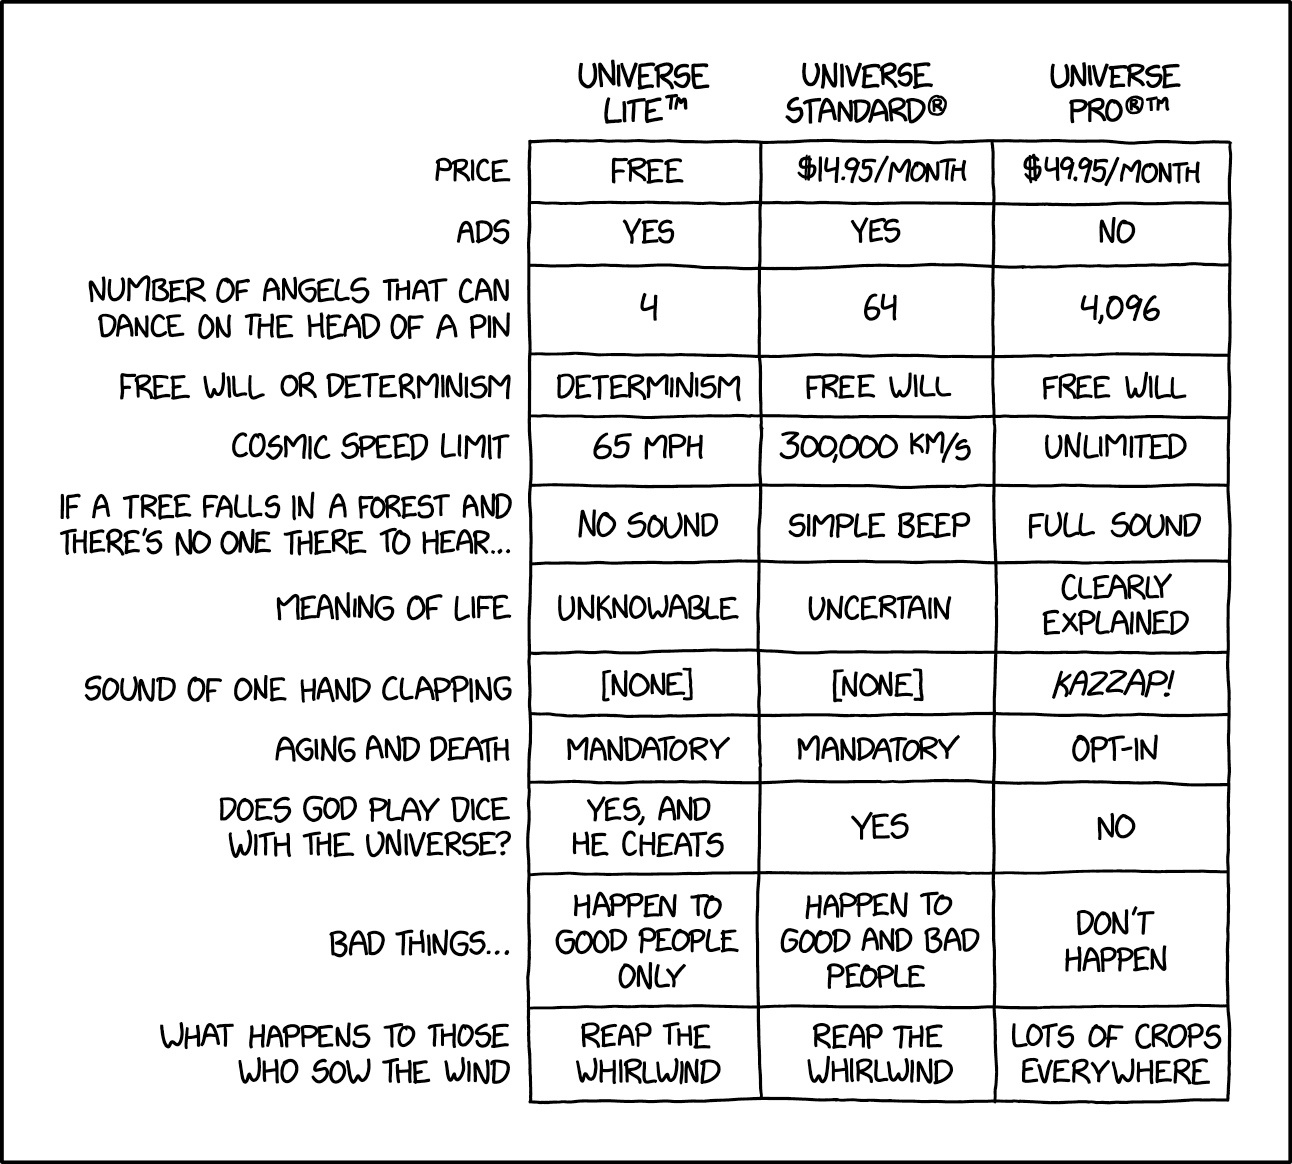 xkcd commic: Univers Price Tiers